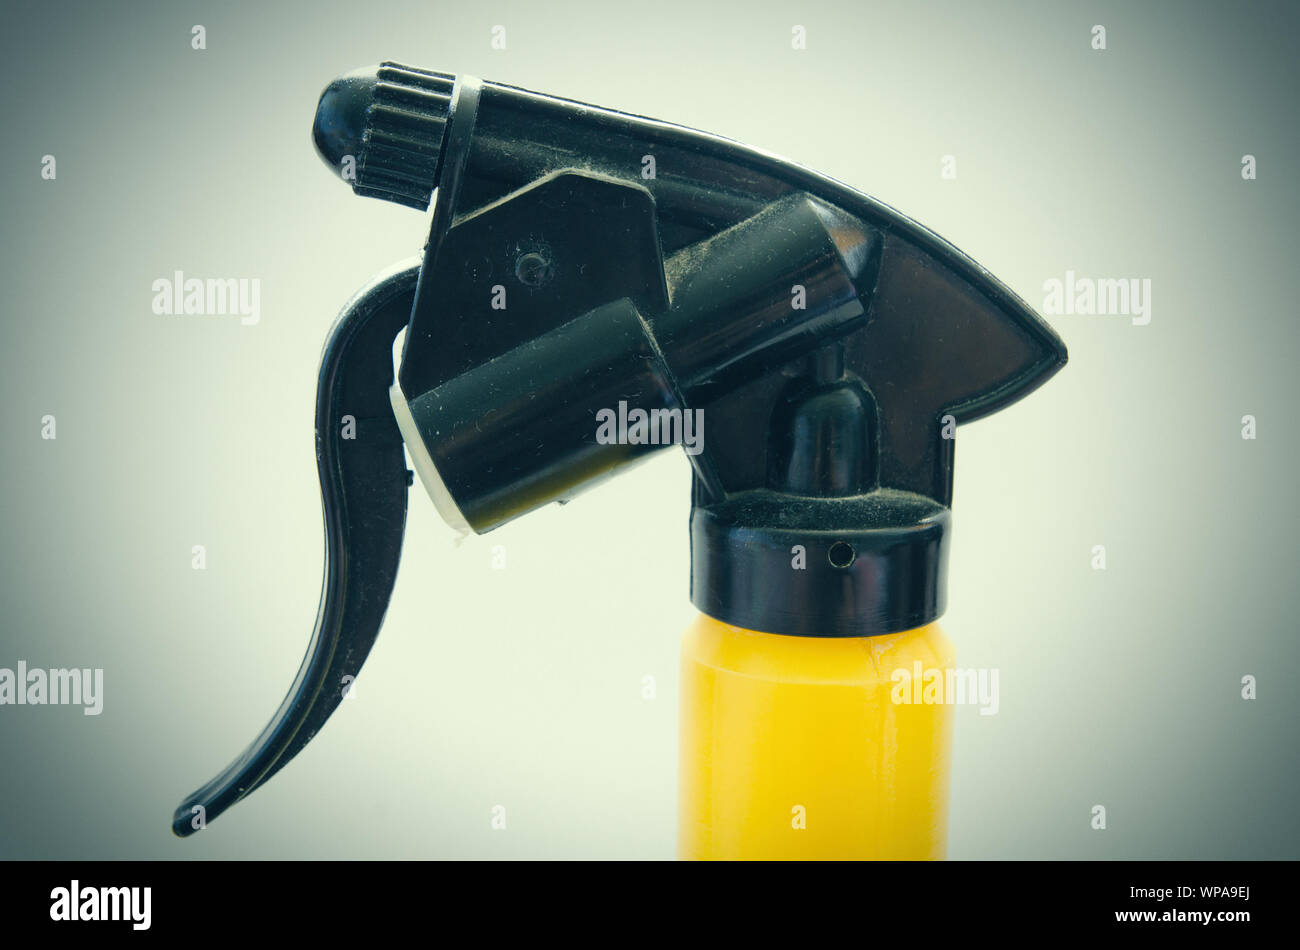 yellow water sprayer with black trigger Stock Photo